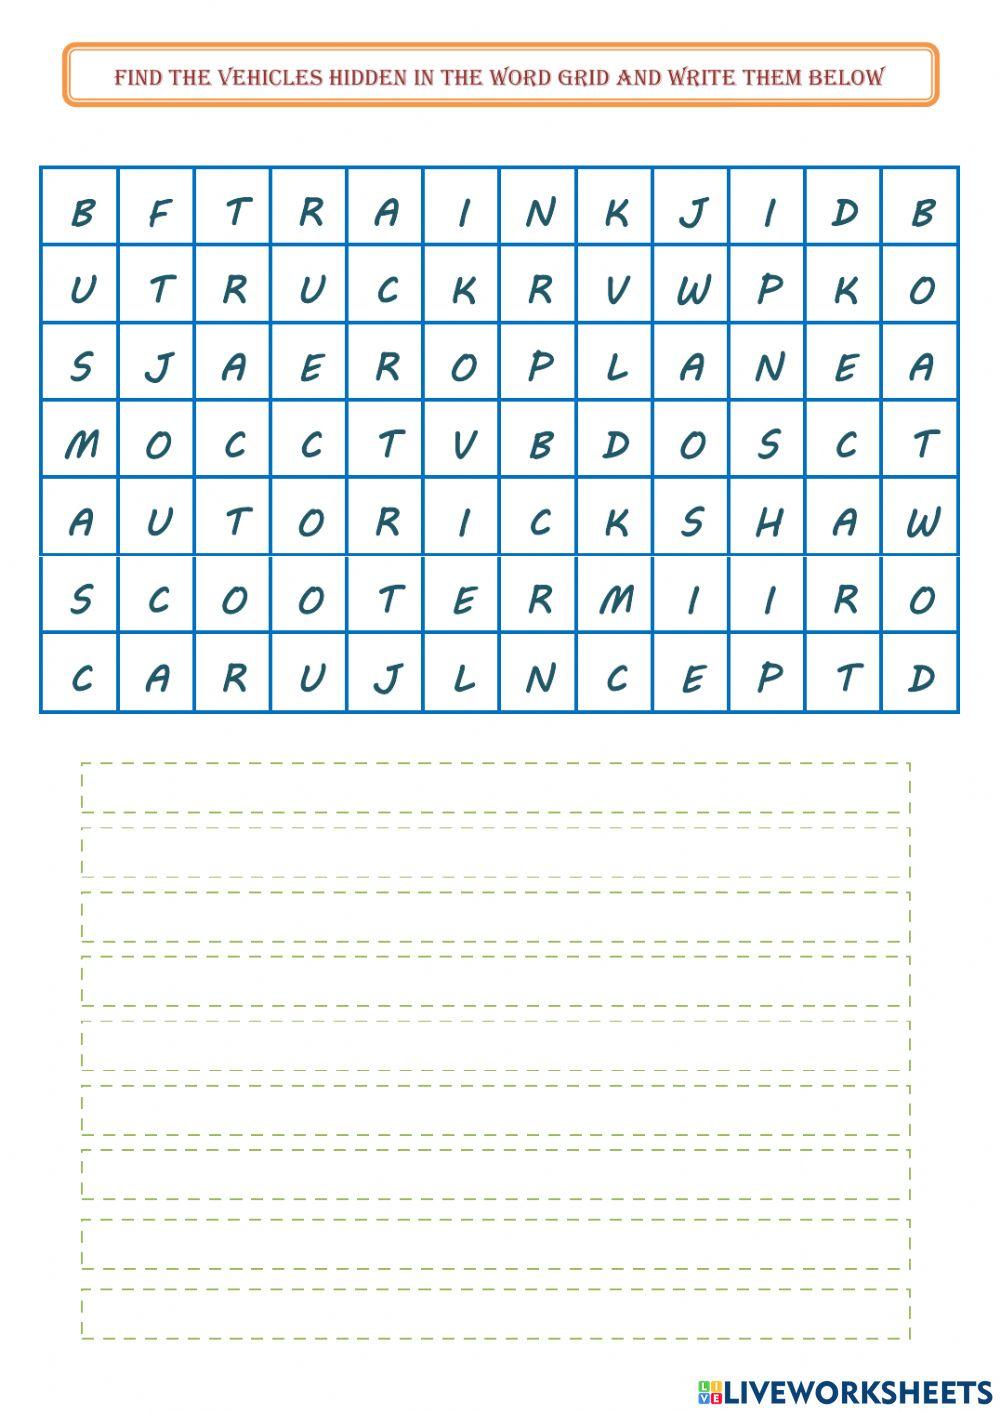 Find the vehicles hidden in the word grid and write them below